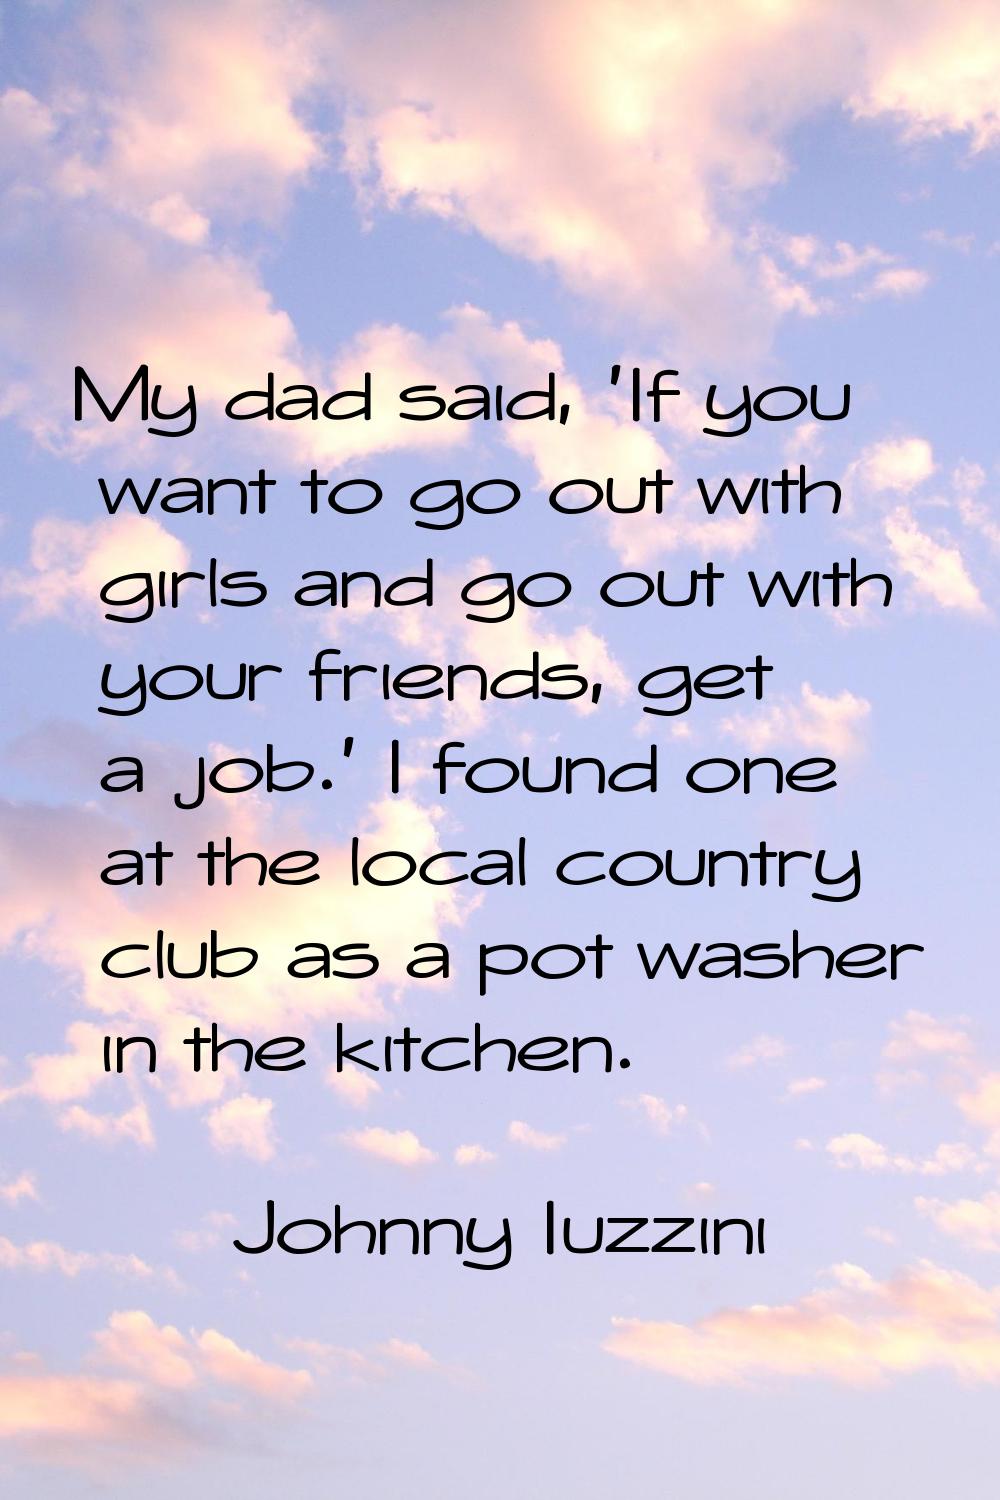 My dad said, 'If you want to go out with girls and go out with your friends, get a job.' I found on